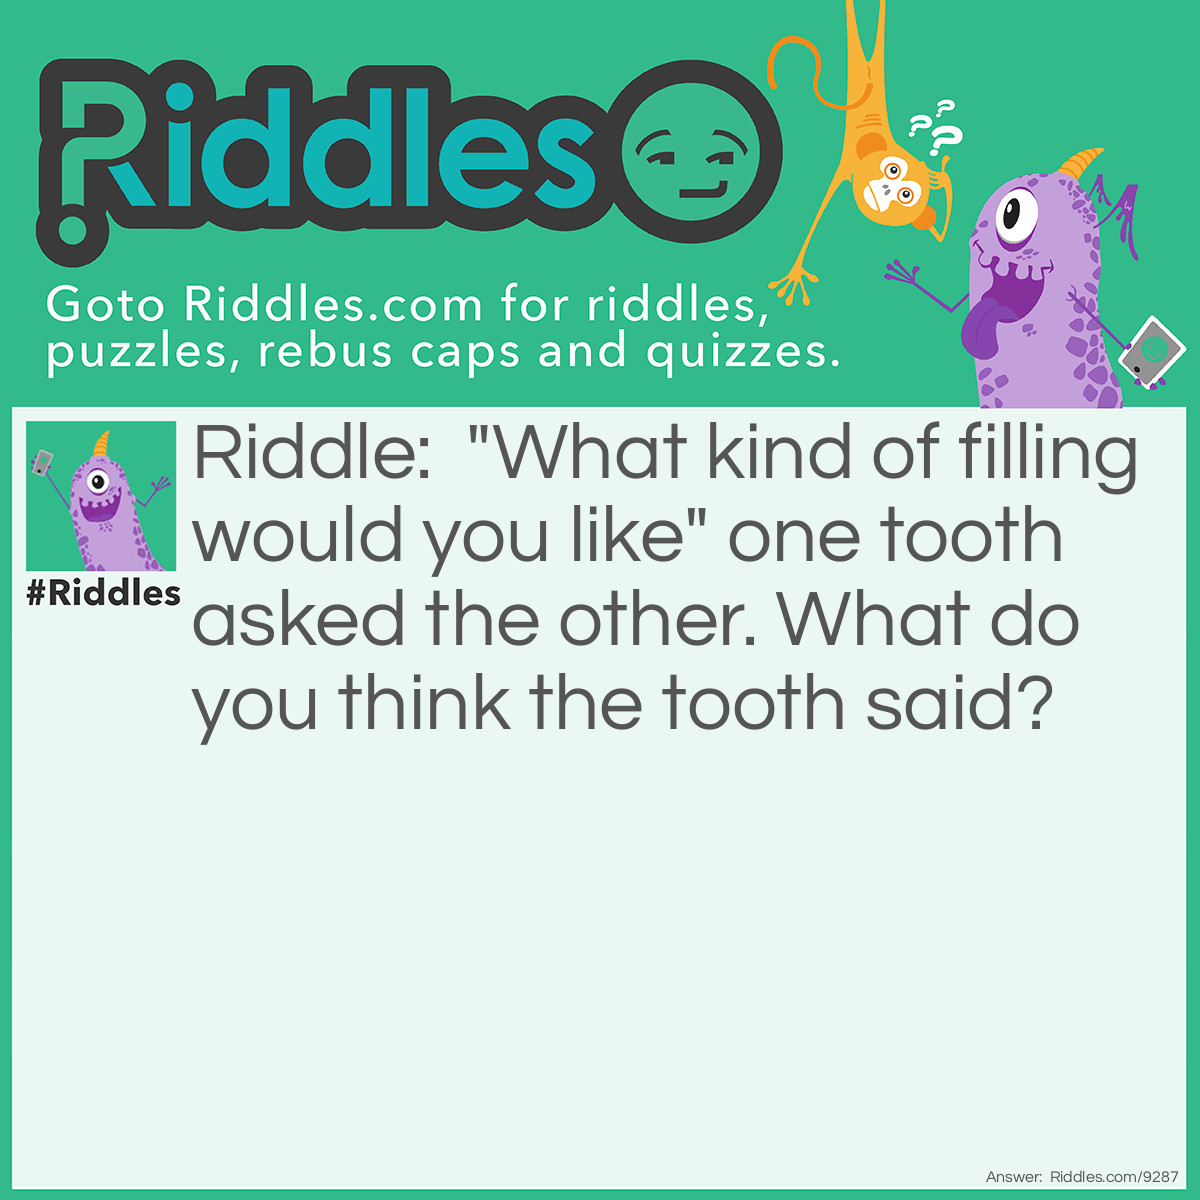 Riddle: "What kind of filling would you like" one tooth asked the other. What do you think the tooth said? Answer: The other tooth said "Any Flavour!!!"